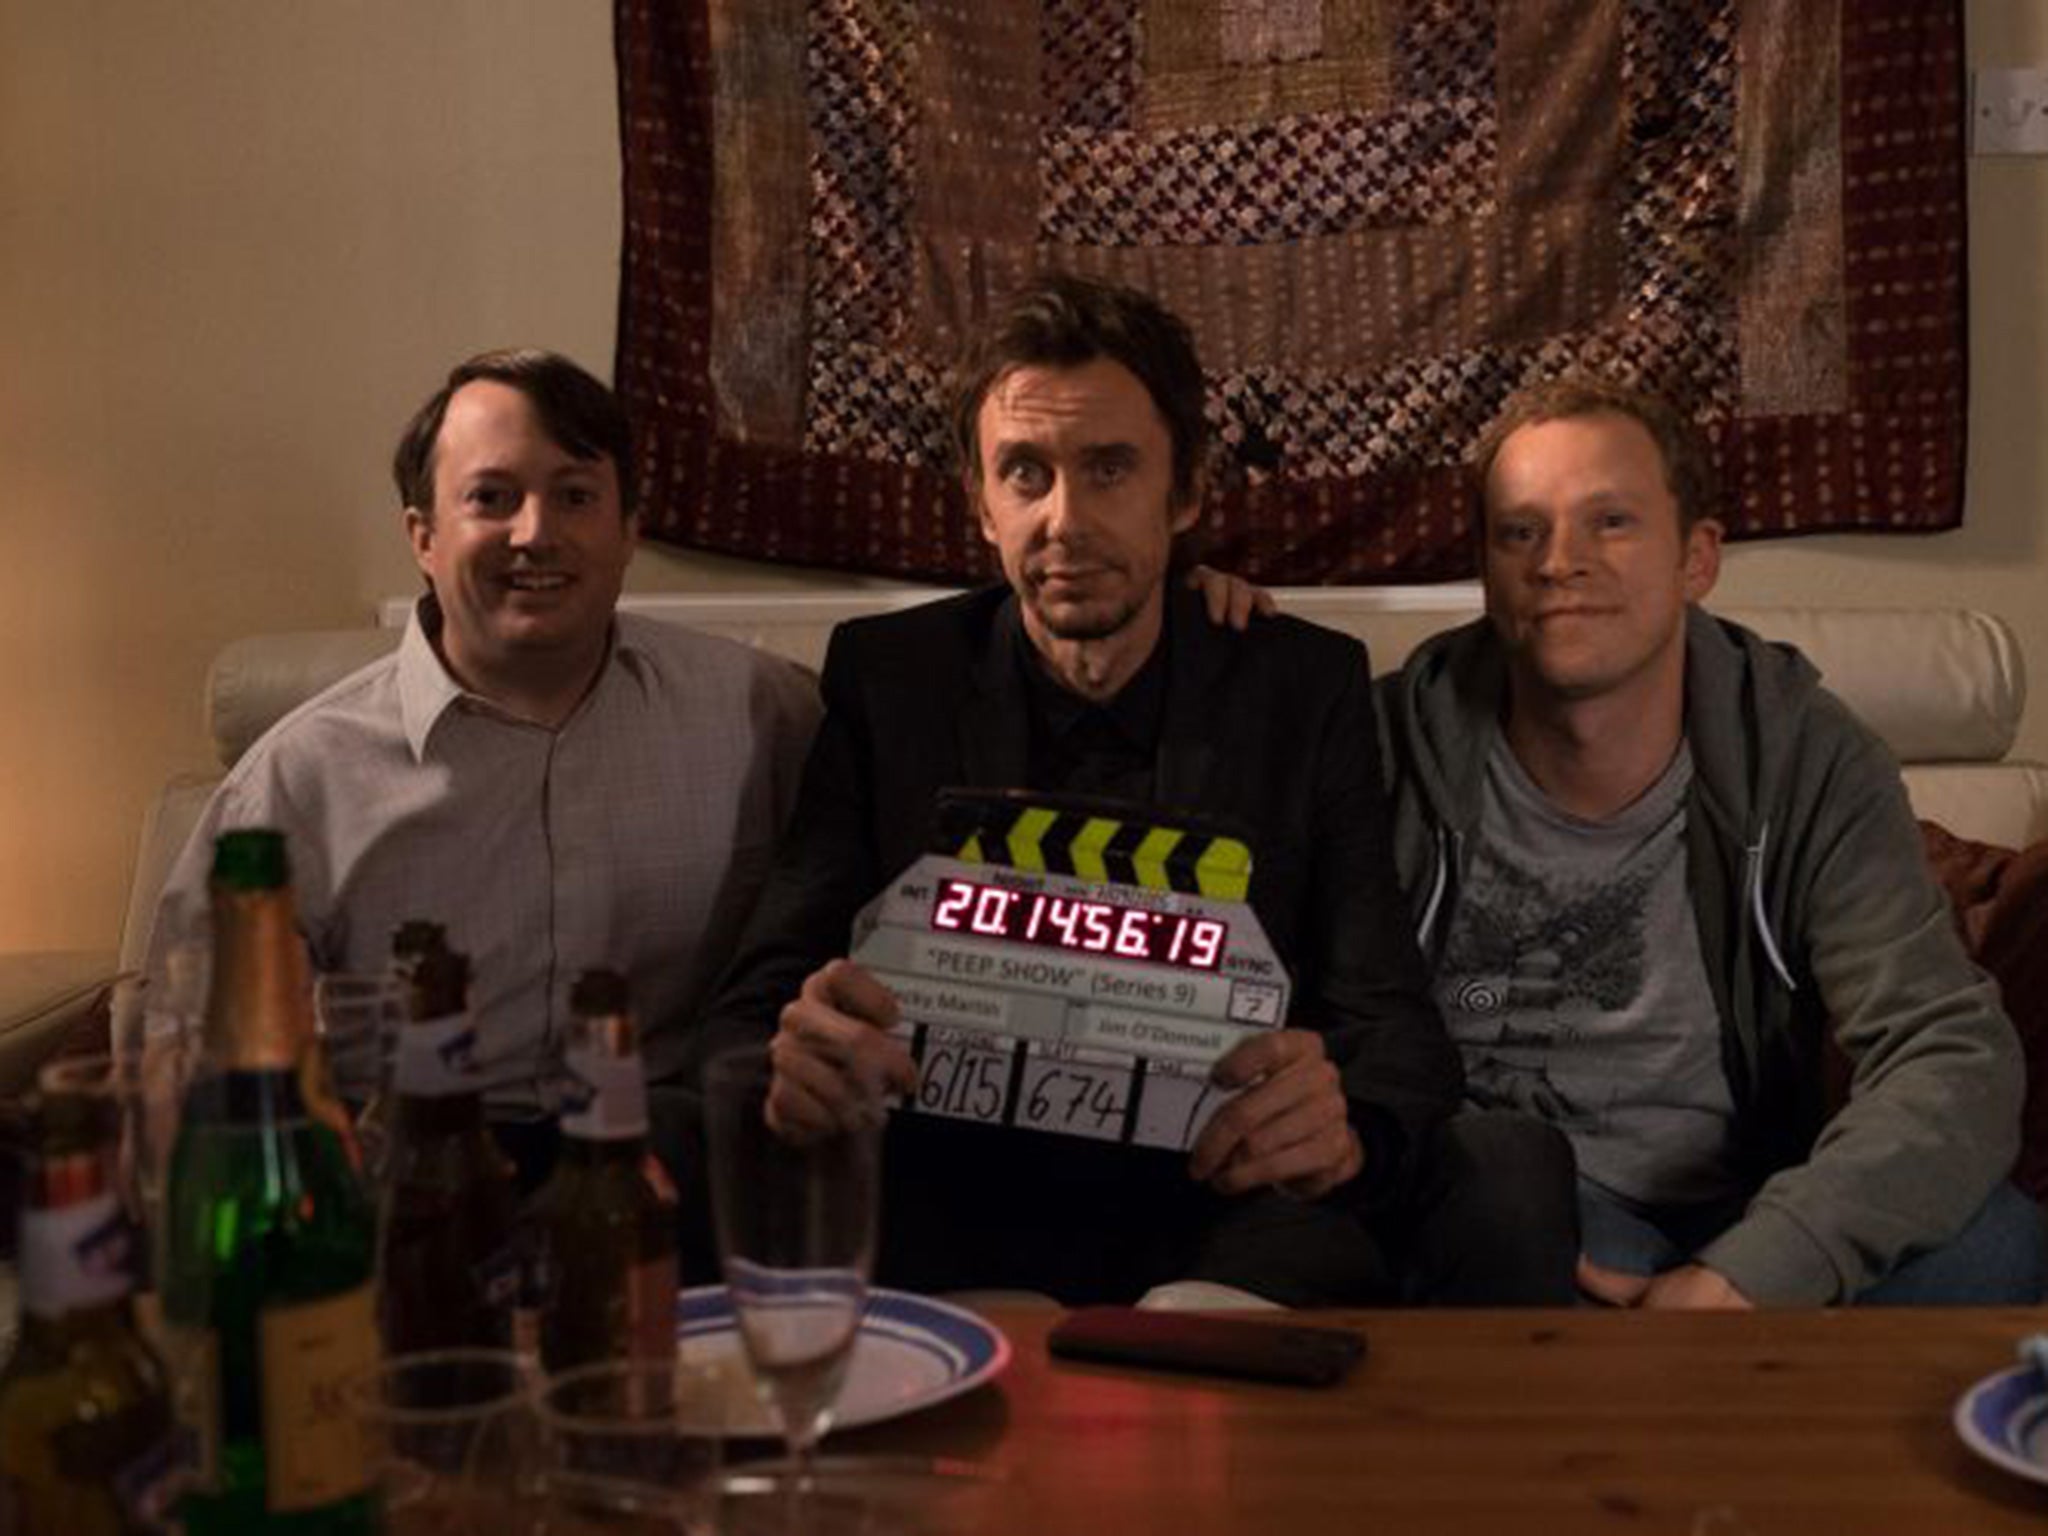 Filming has wrapped up for the final series of Peep Show